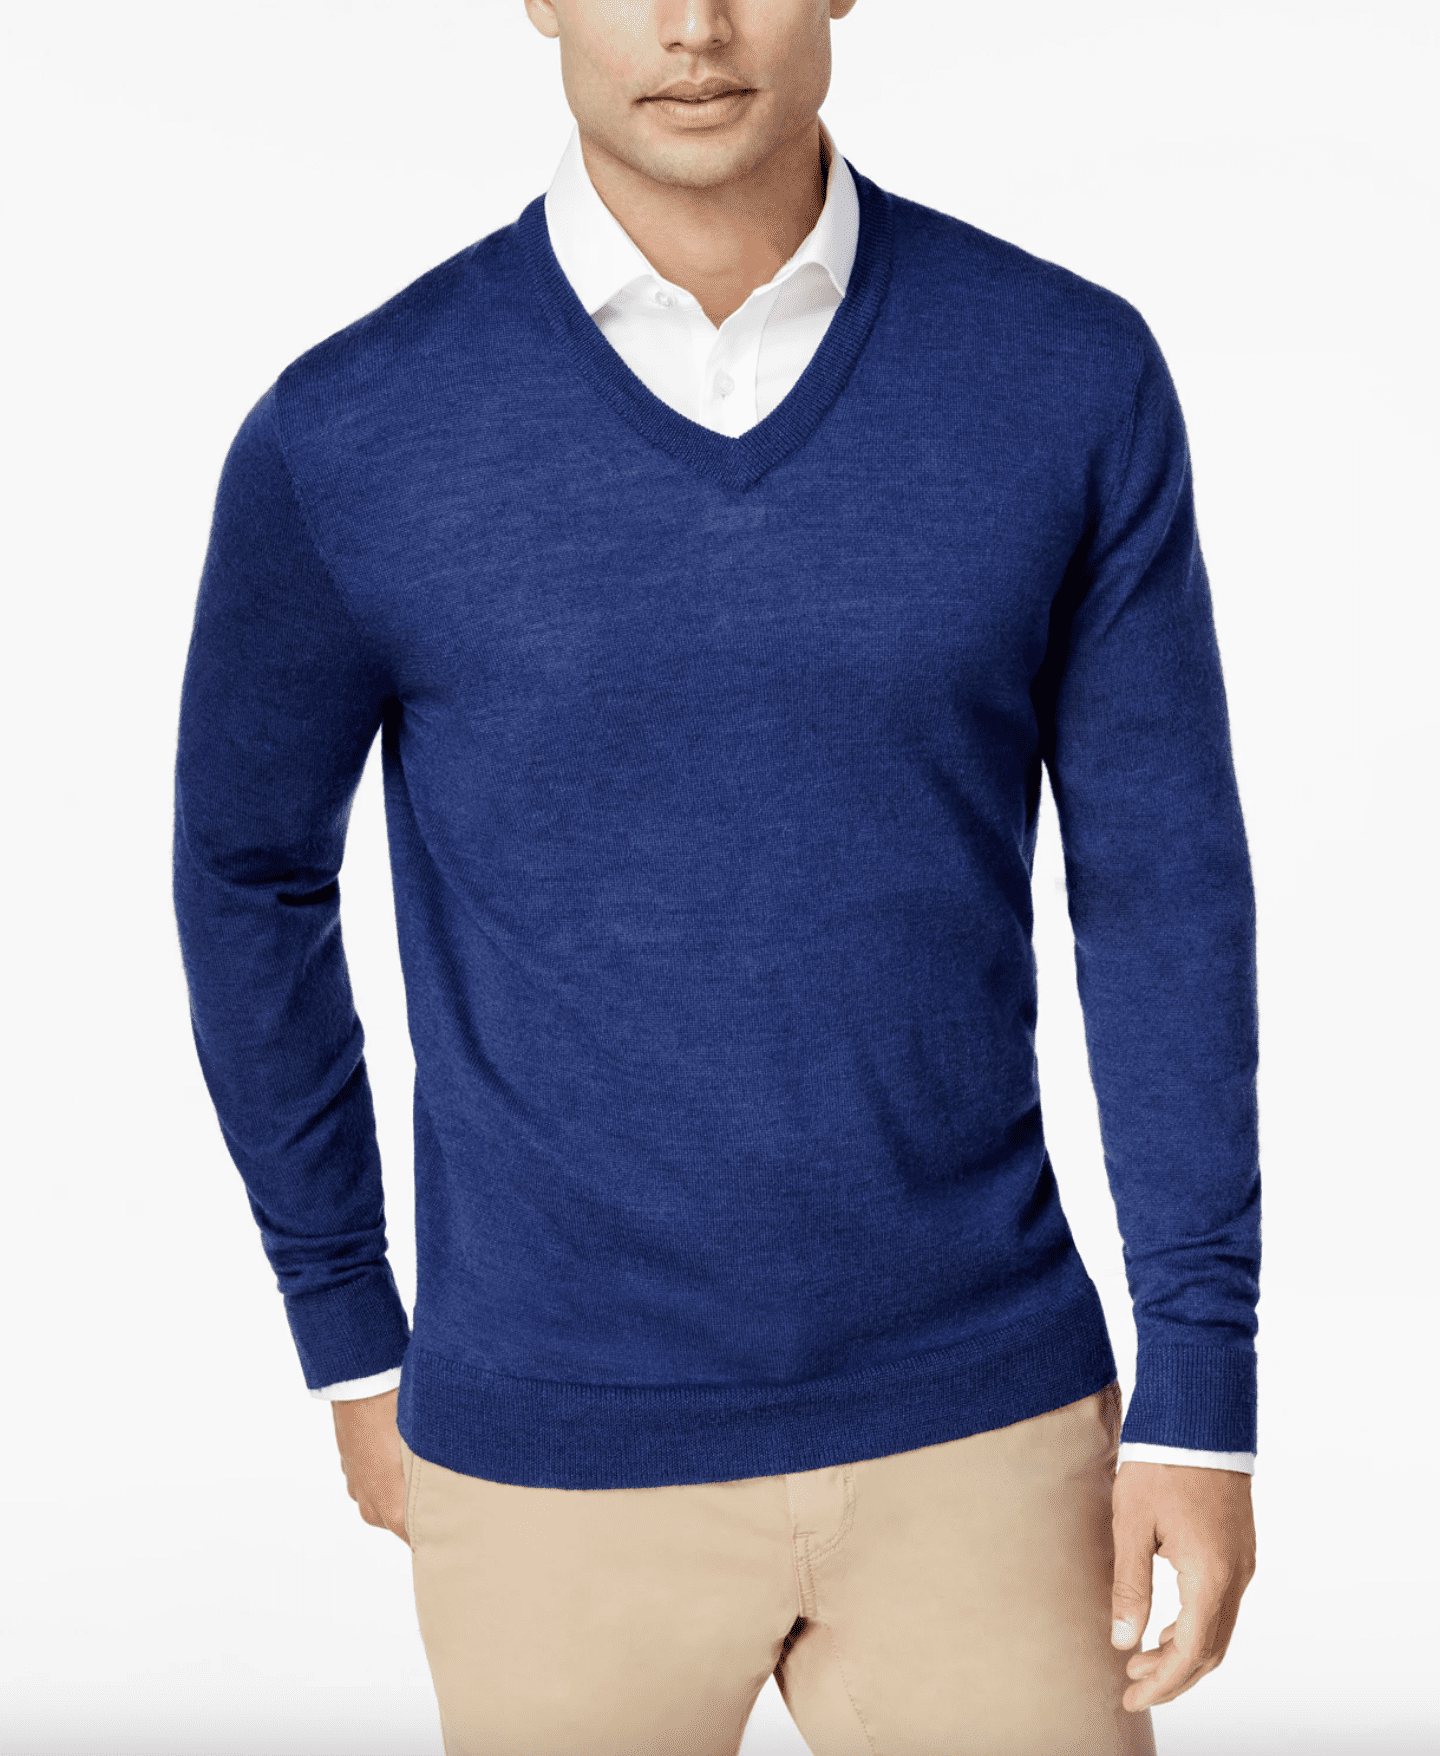 Club Room Mens Sweater Blue Large L Two Tone Colorblock 1/2 Zip Pullover $55 038 